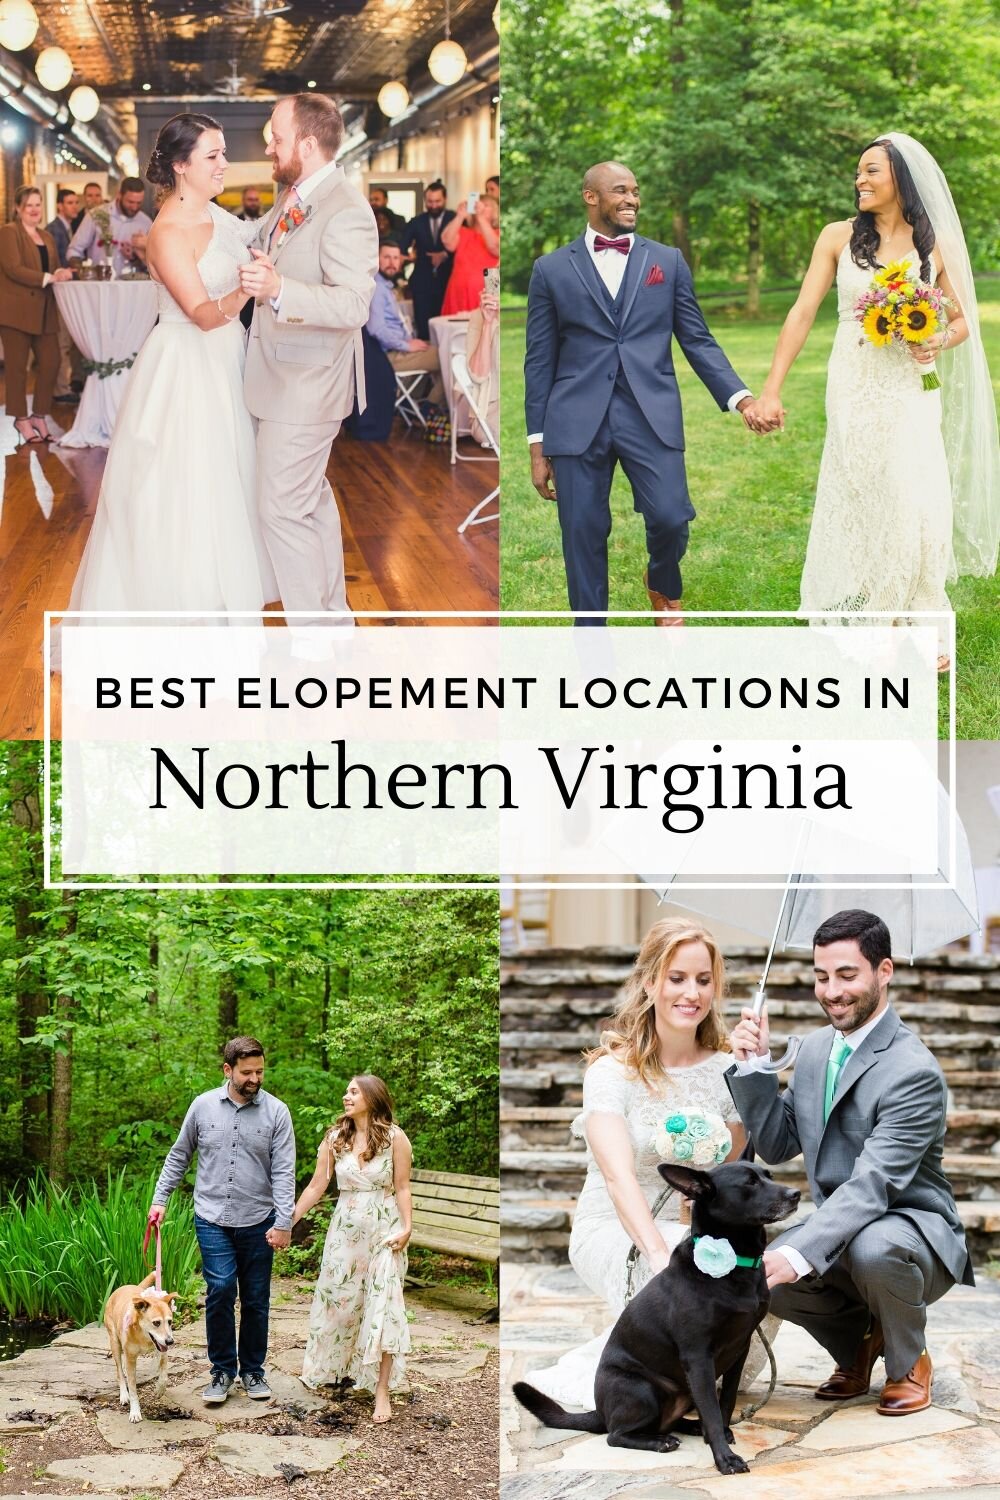 Locations to elope in Northern VA